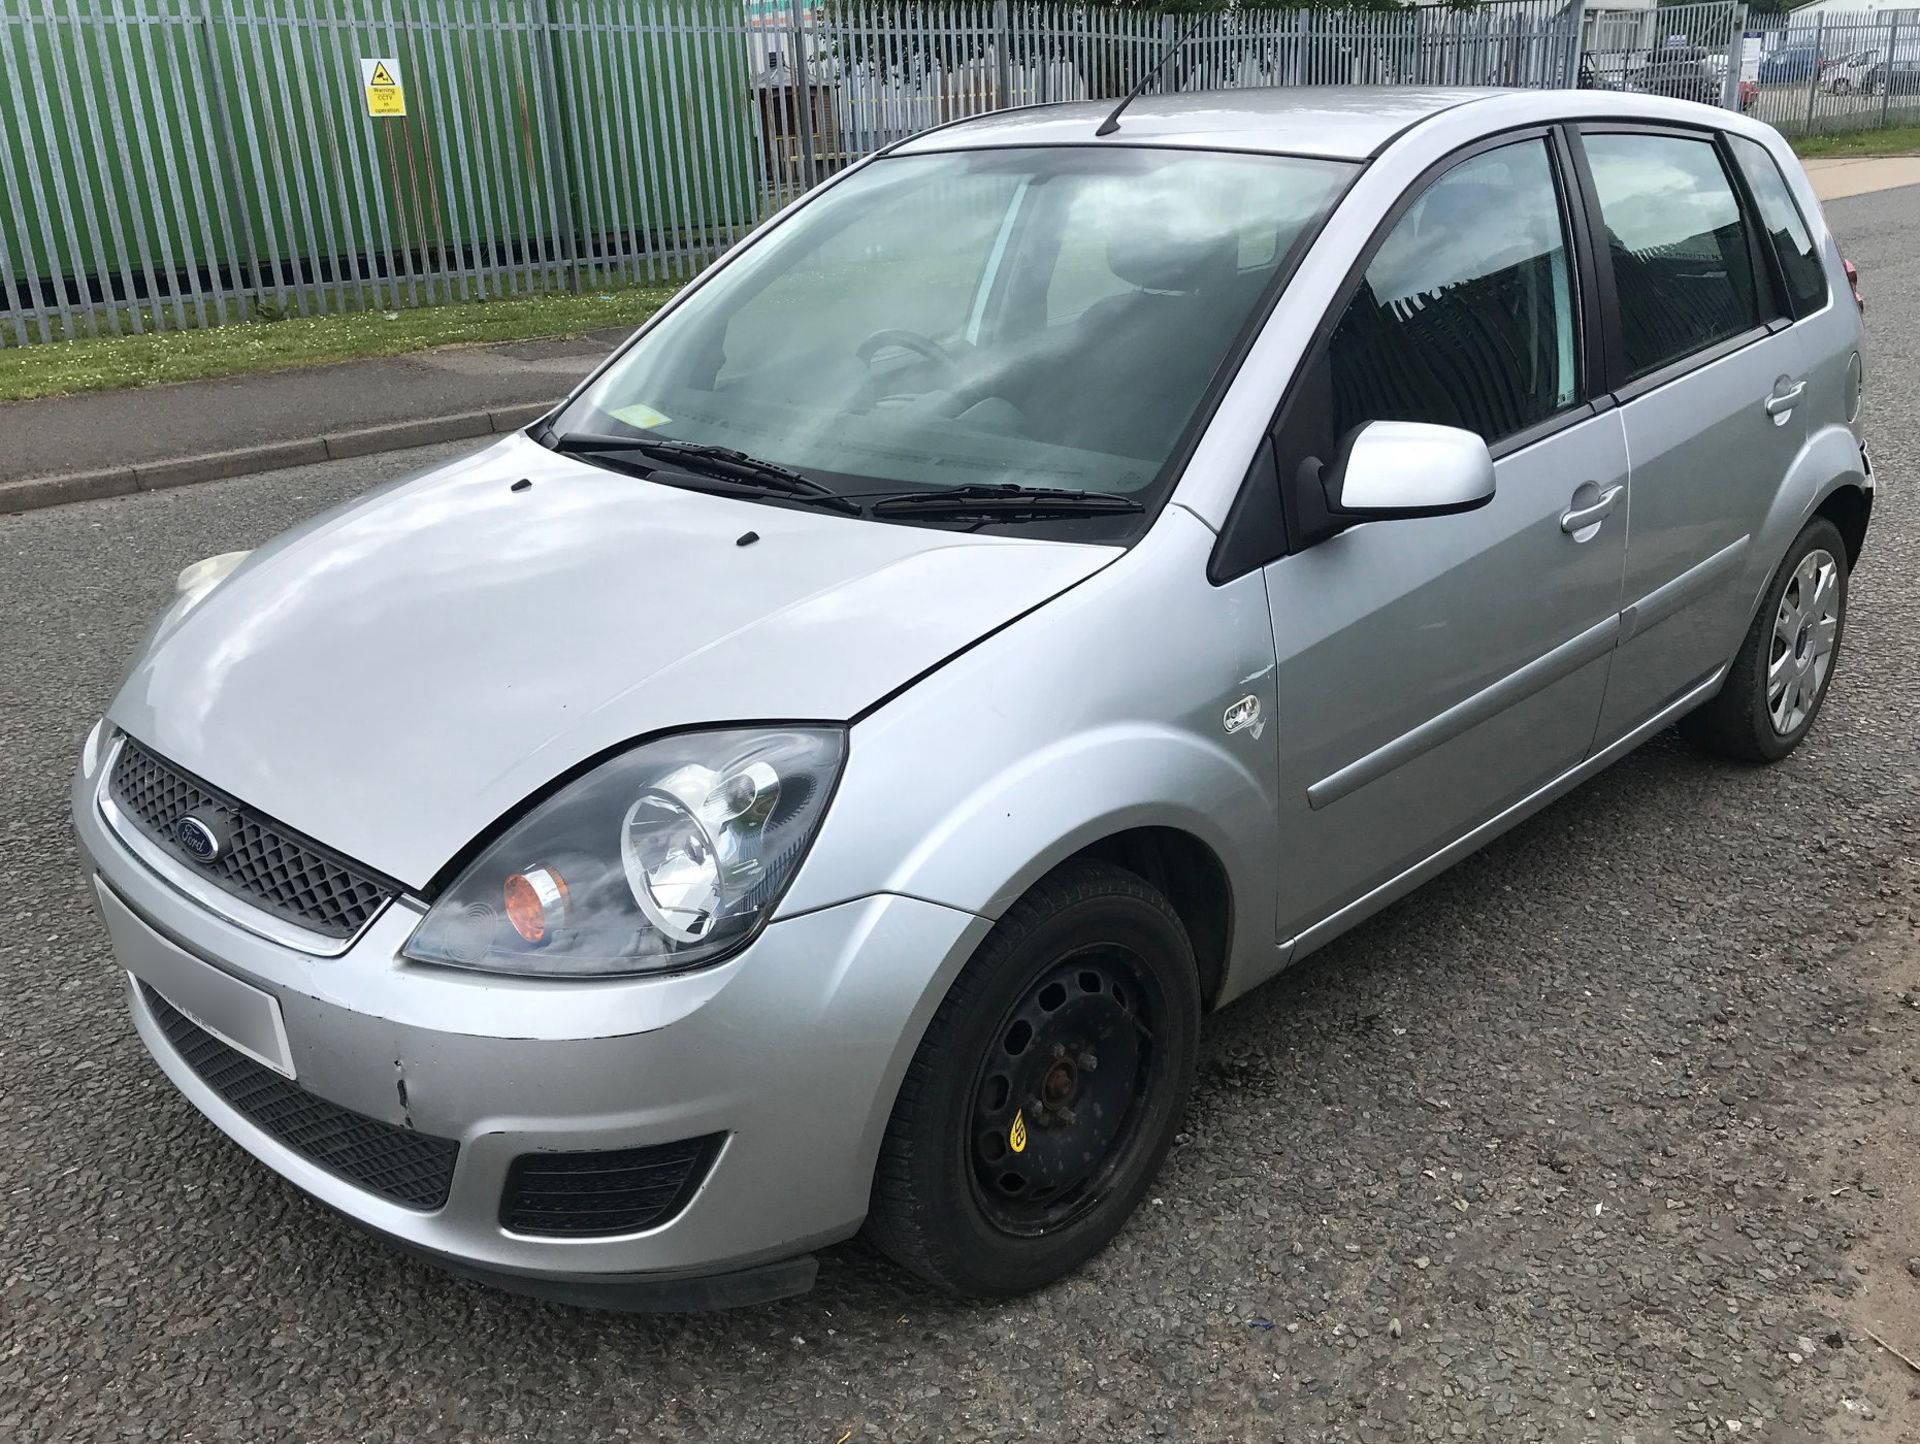 2008 Ford Fiesta 1.4 Tdci Zetec Climate - CL505 - NO VAT ON THE HAMMER - Location: Corby, - Image 5 of 10